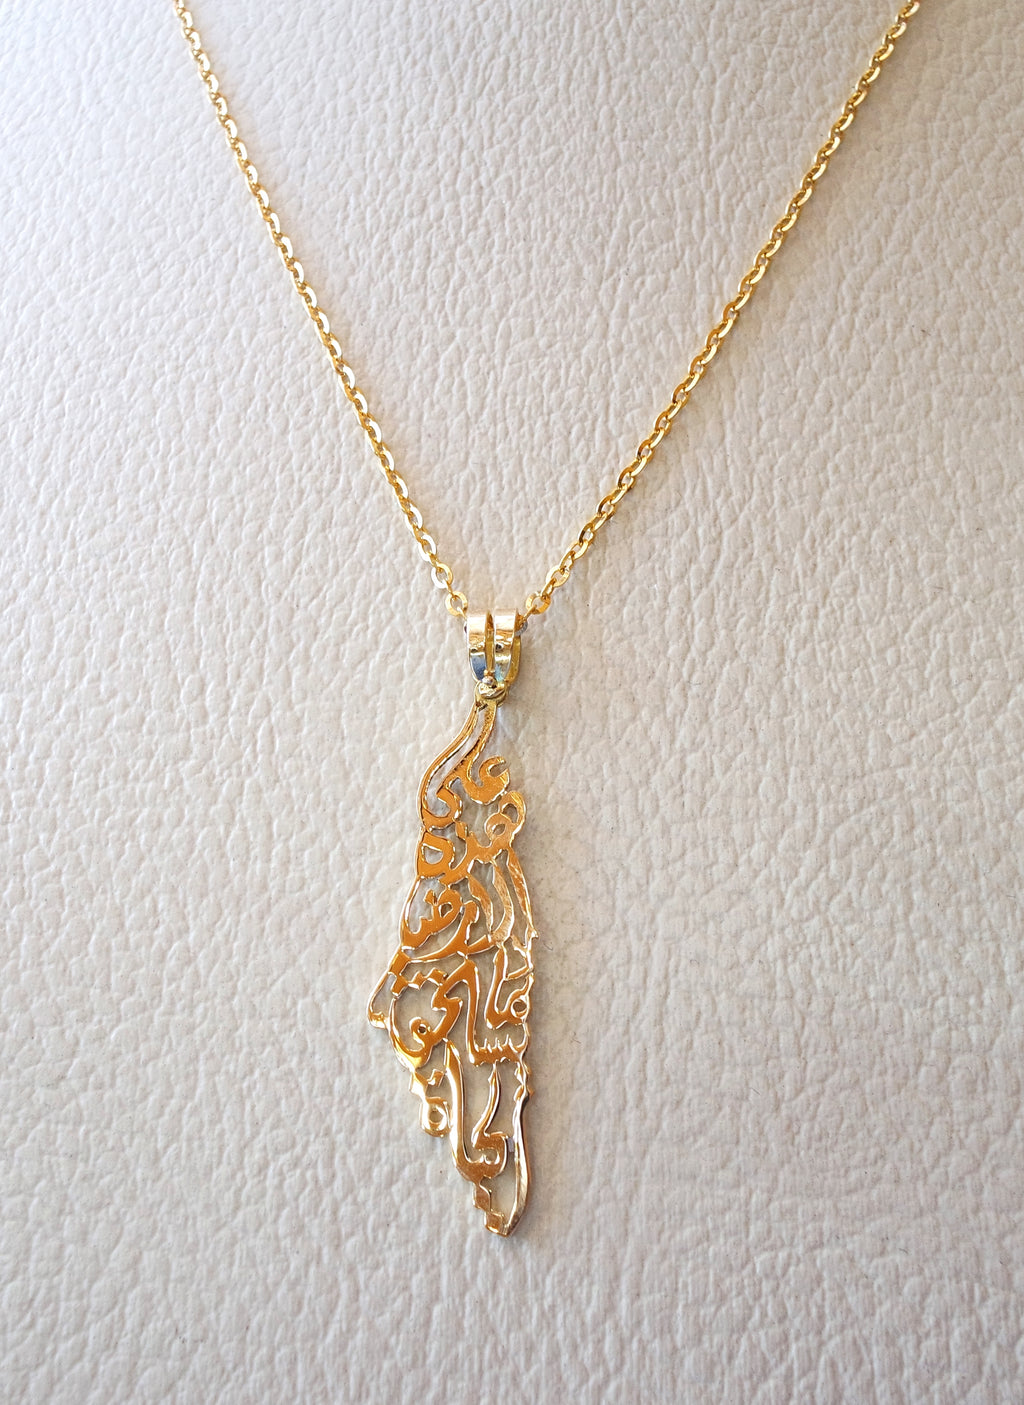 Palestine map pendant with chain famous poem verse 18 k gold jewelry arabic fast shipping خارطه و علم فلسطين